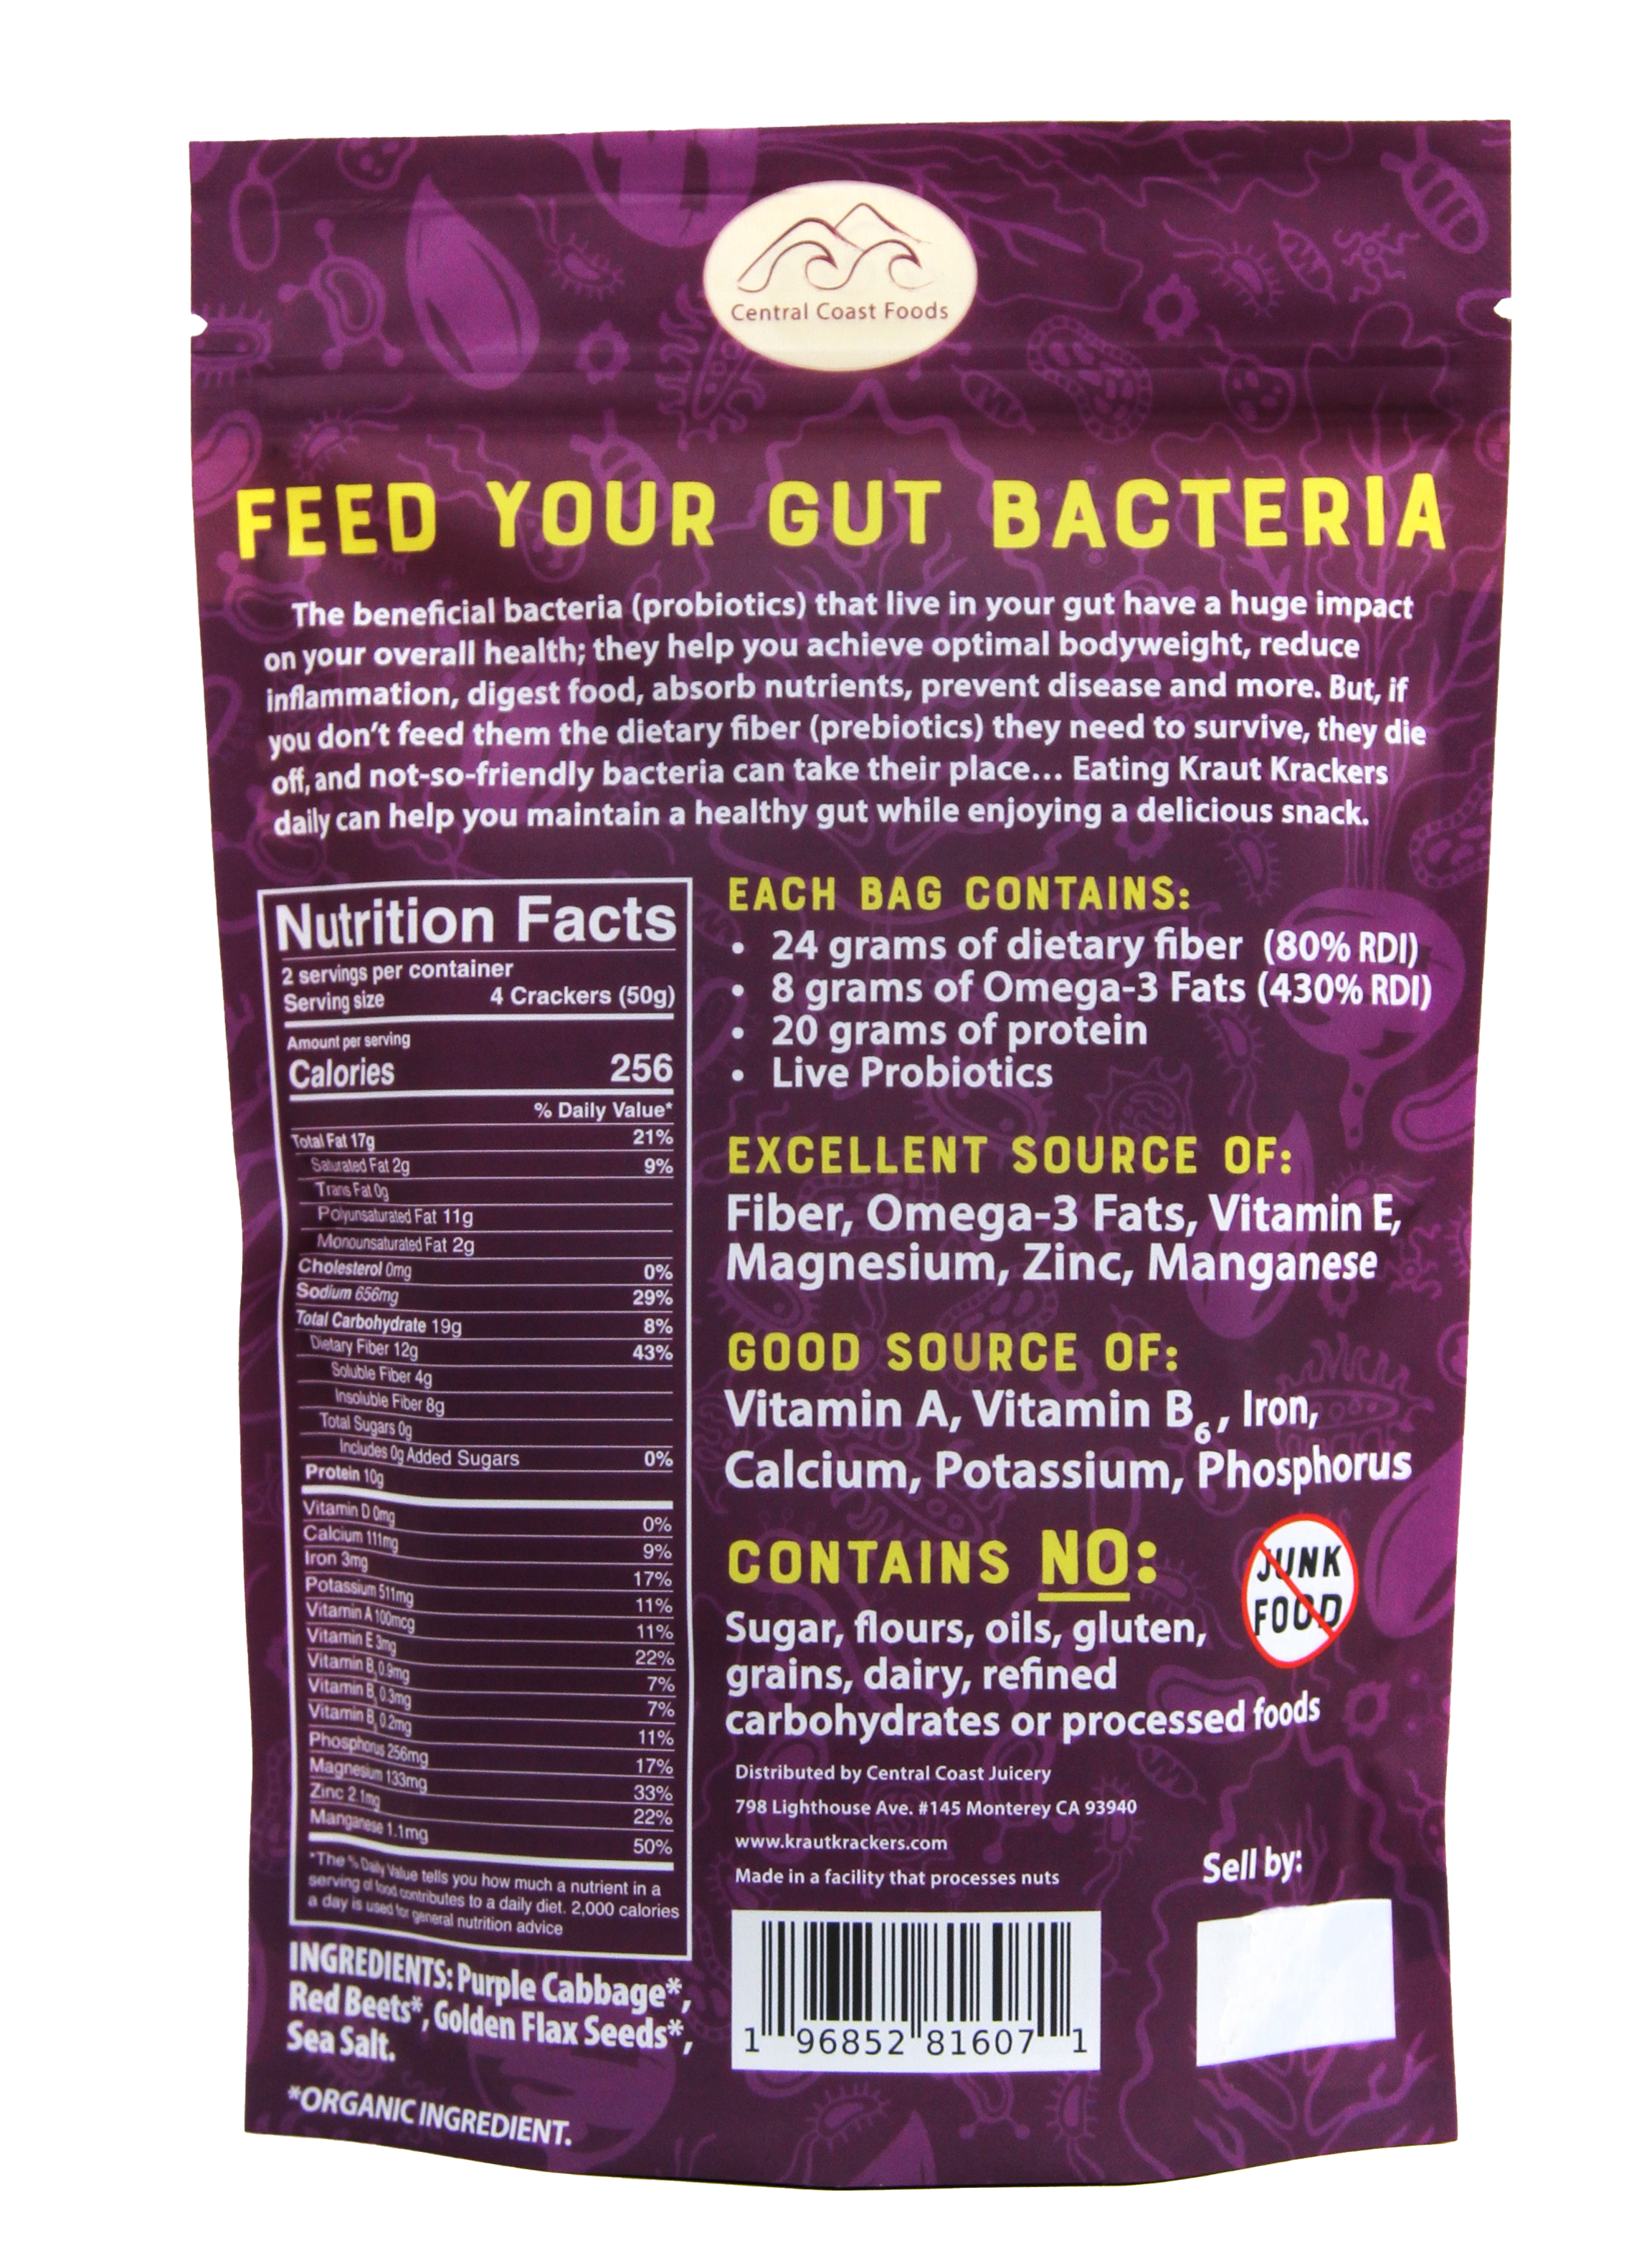 Back of the bag containing nutritional information